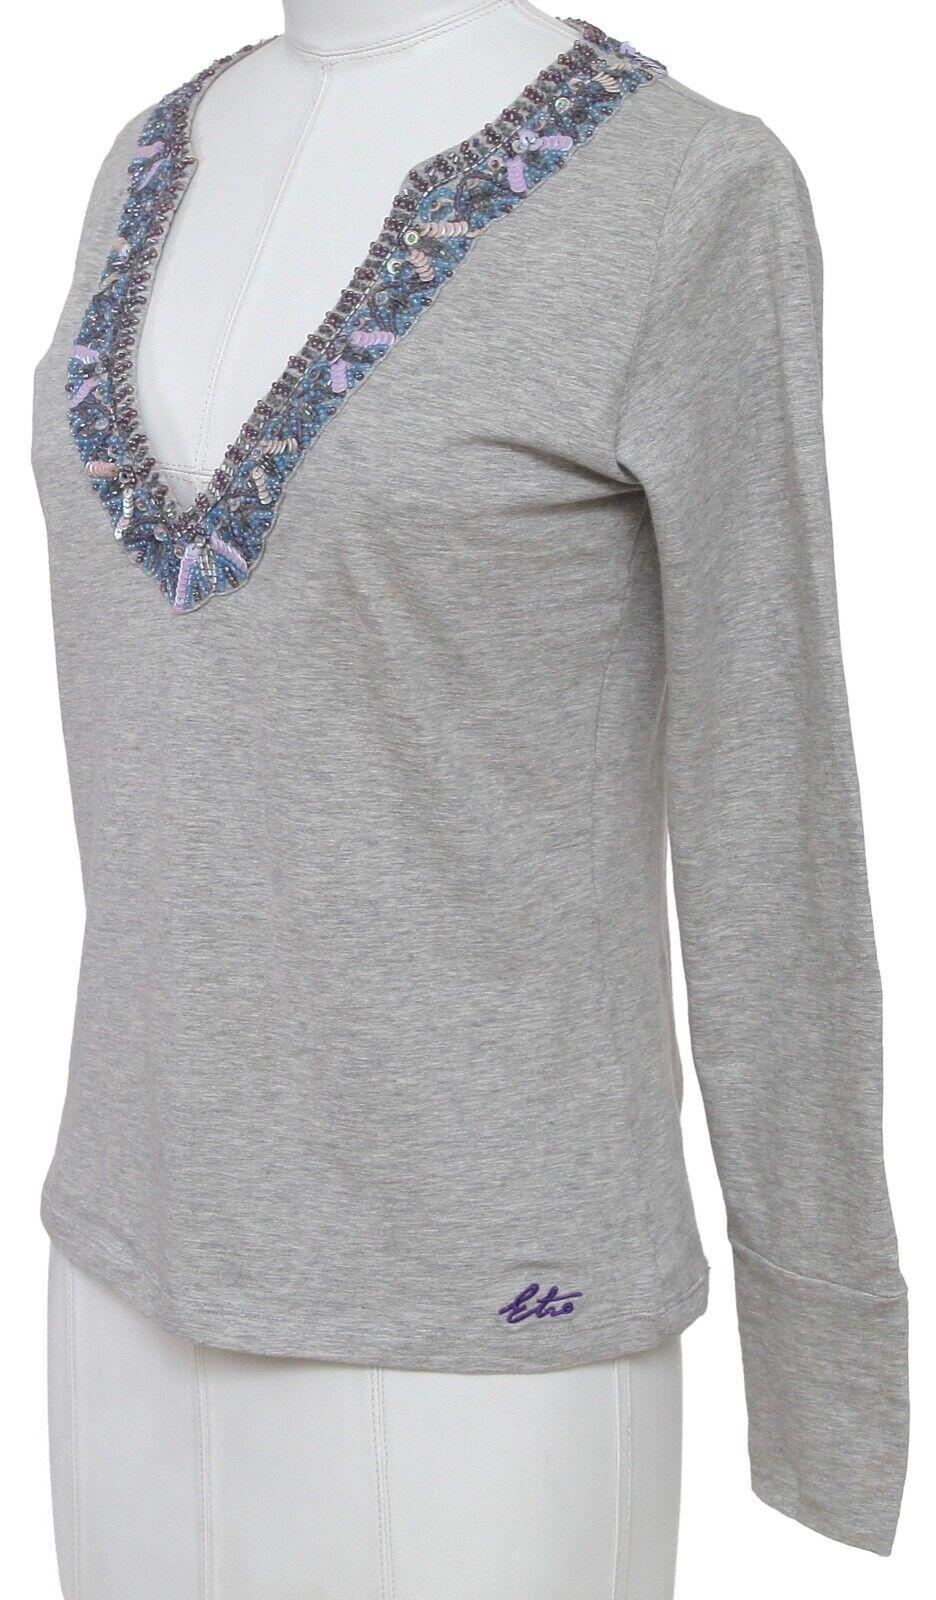 GUARANTEED AUTHENTIC ETRO GREY SEQUIN BEADED DETAIL LONG SLEEVE TOP



Design:
- Easy fit v-neck t-shirt type top.
- Sequin and beaded detail around the neckline.
- Long sleeve.
- Slip on.

Size: 42

Material: 95% Cotton, 5% Lycra

Measurements